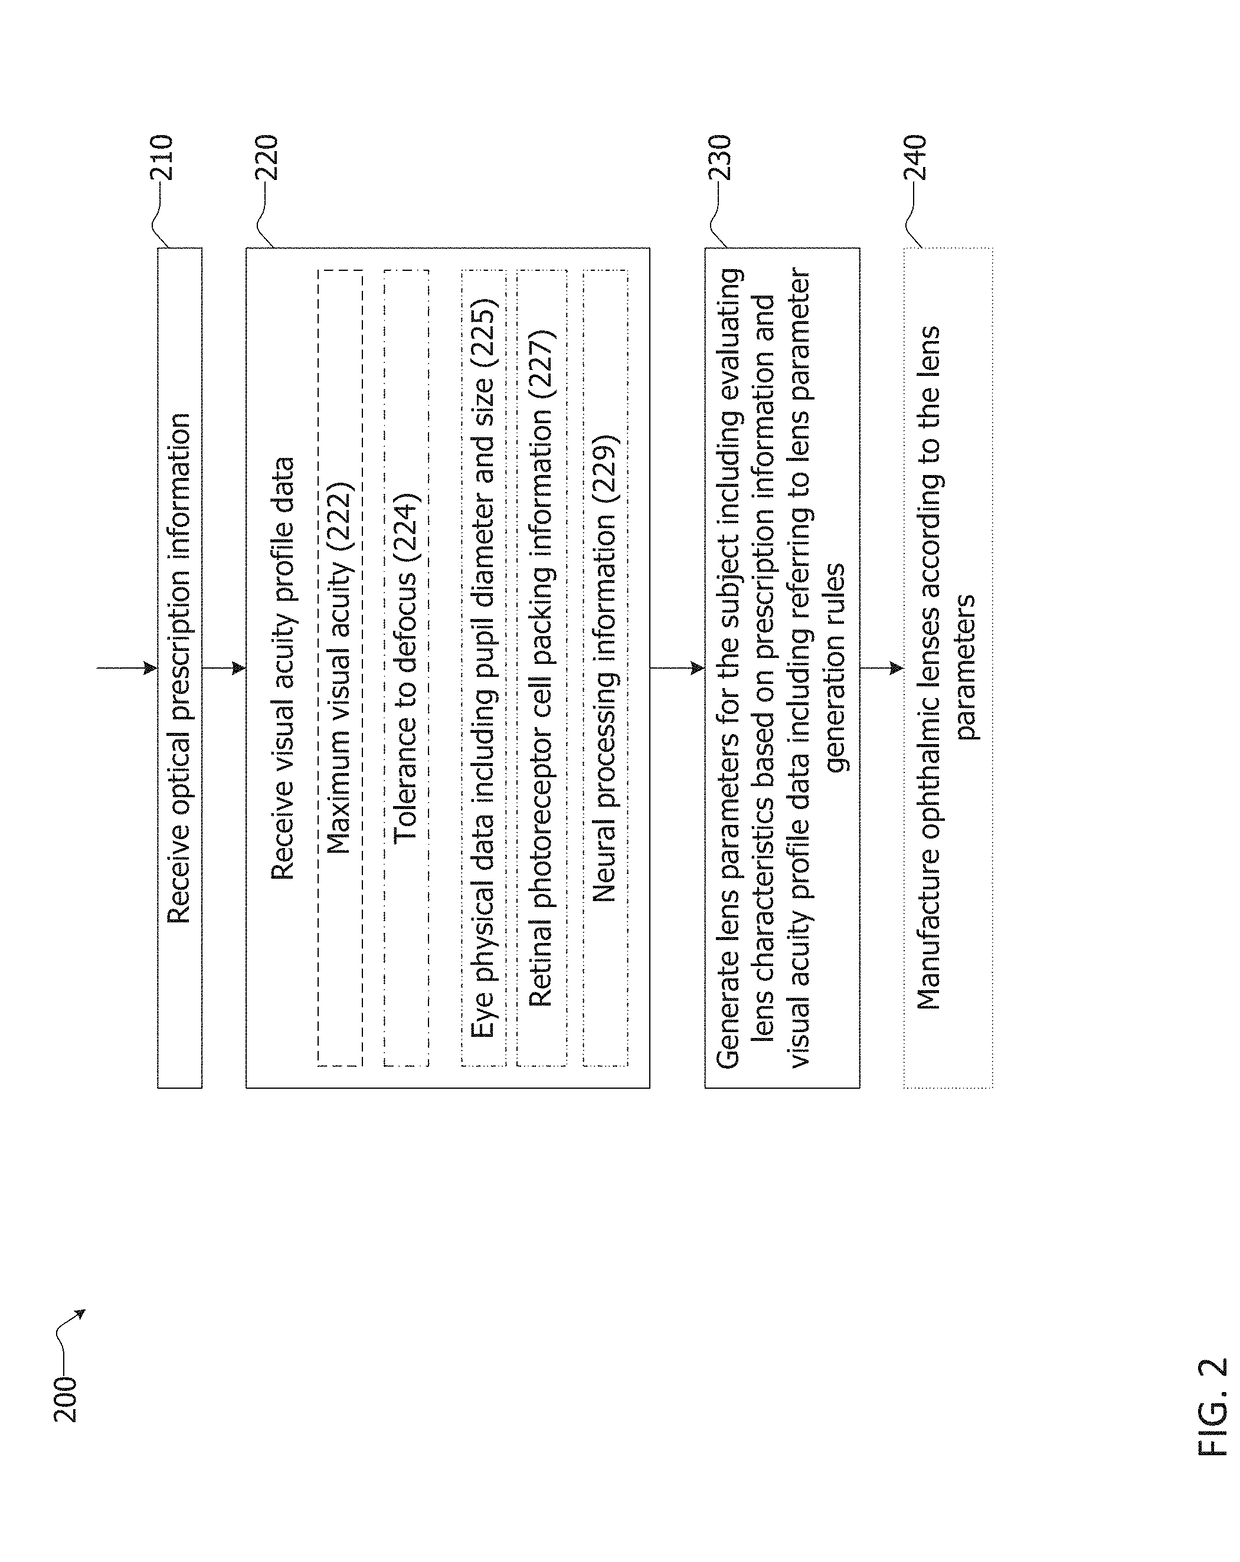 Ophthalmic lens design incorporating a visual acuity profile